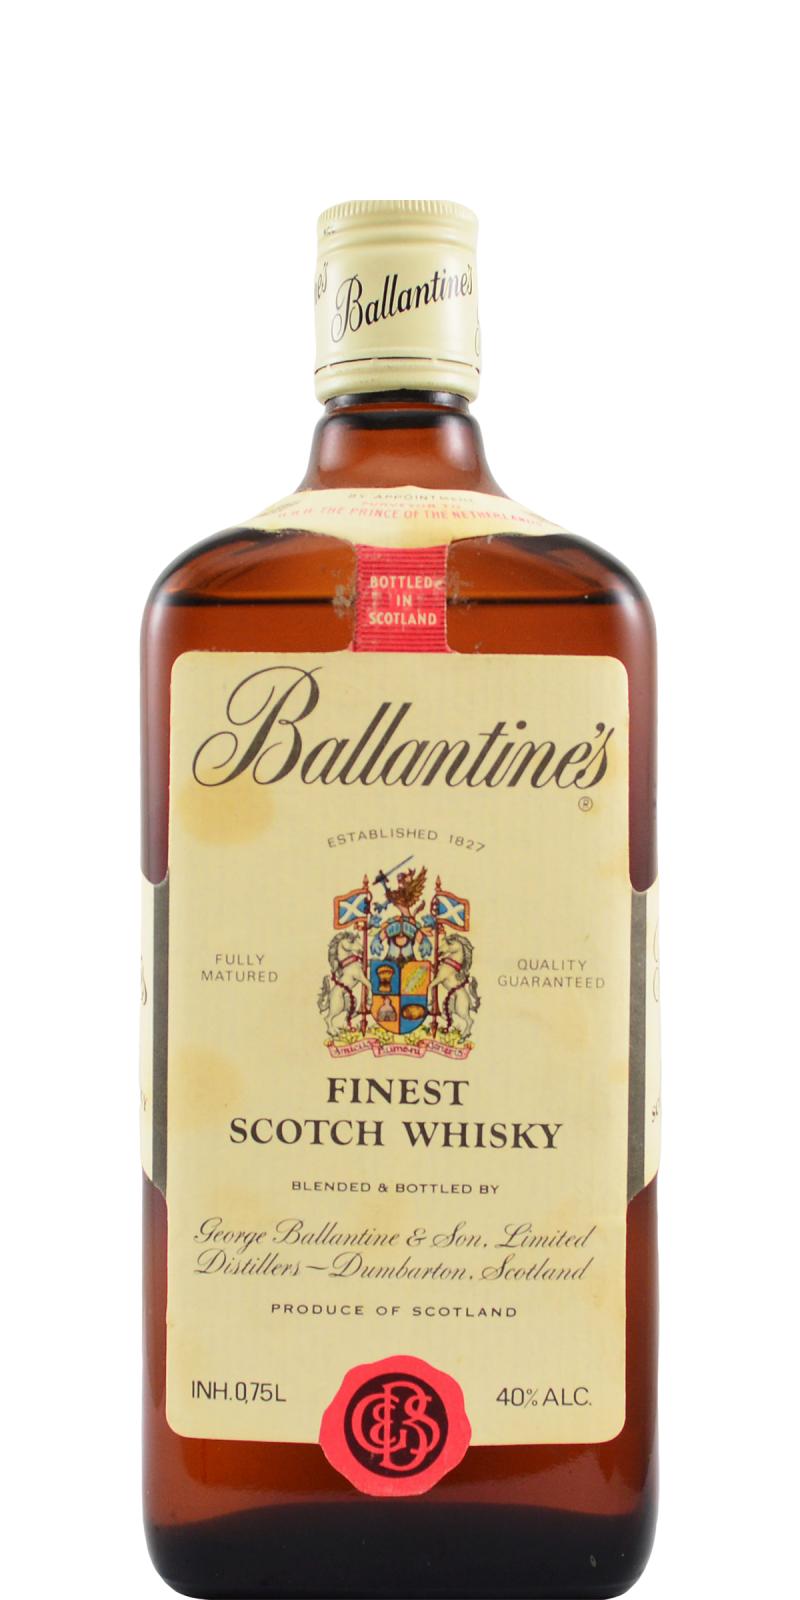 Ballantine's Finest Scotch Whisky H.R.H. The Prince of The Netherlands 40% 750ml